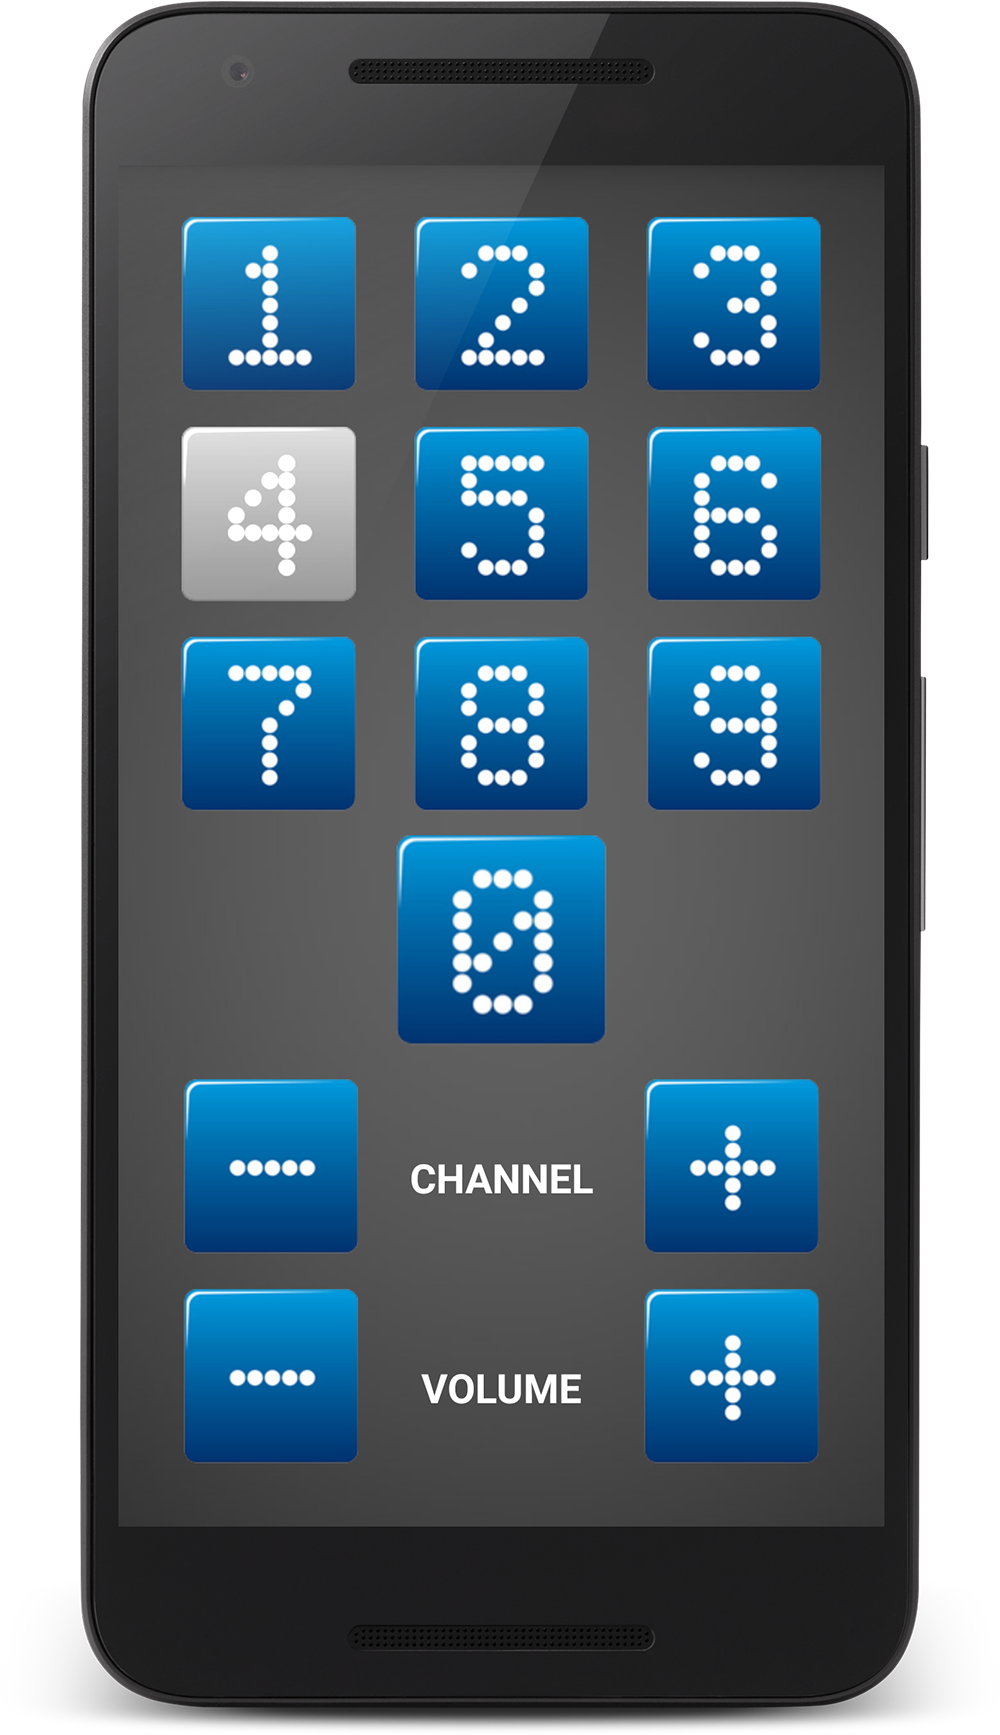 Android application TV remote control screenshort